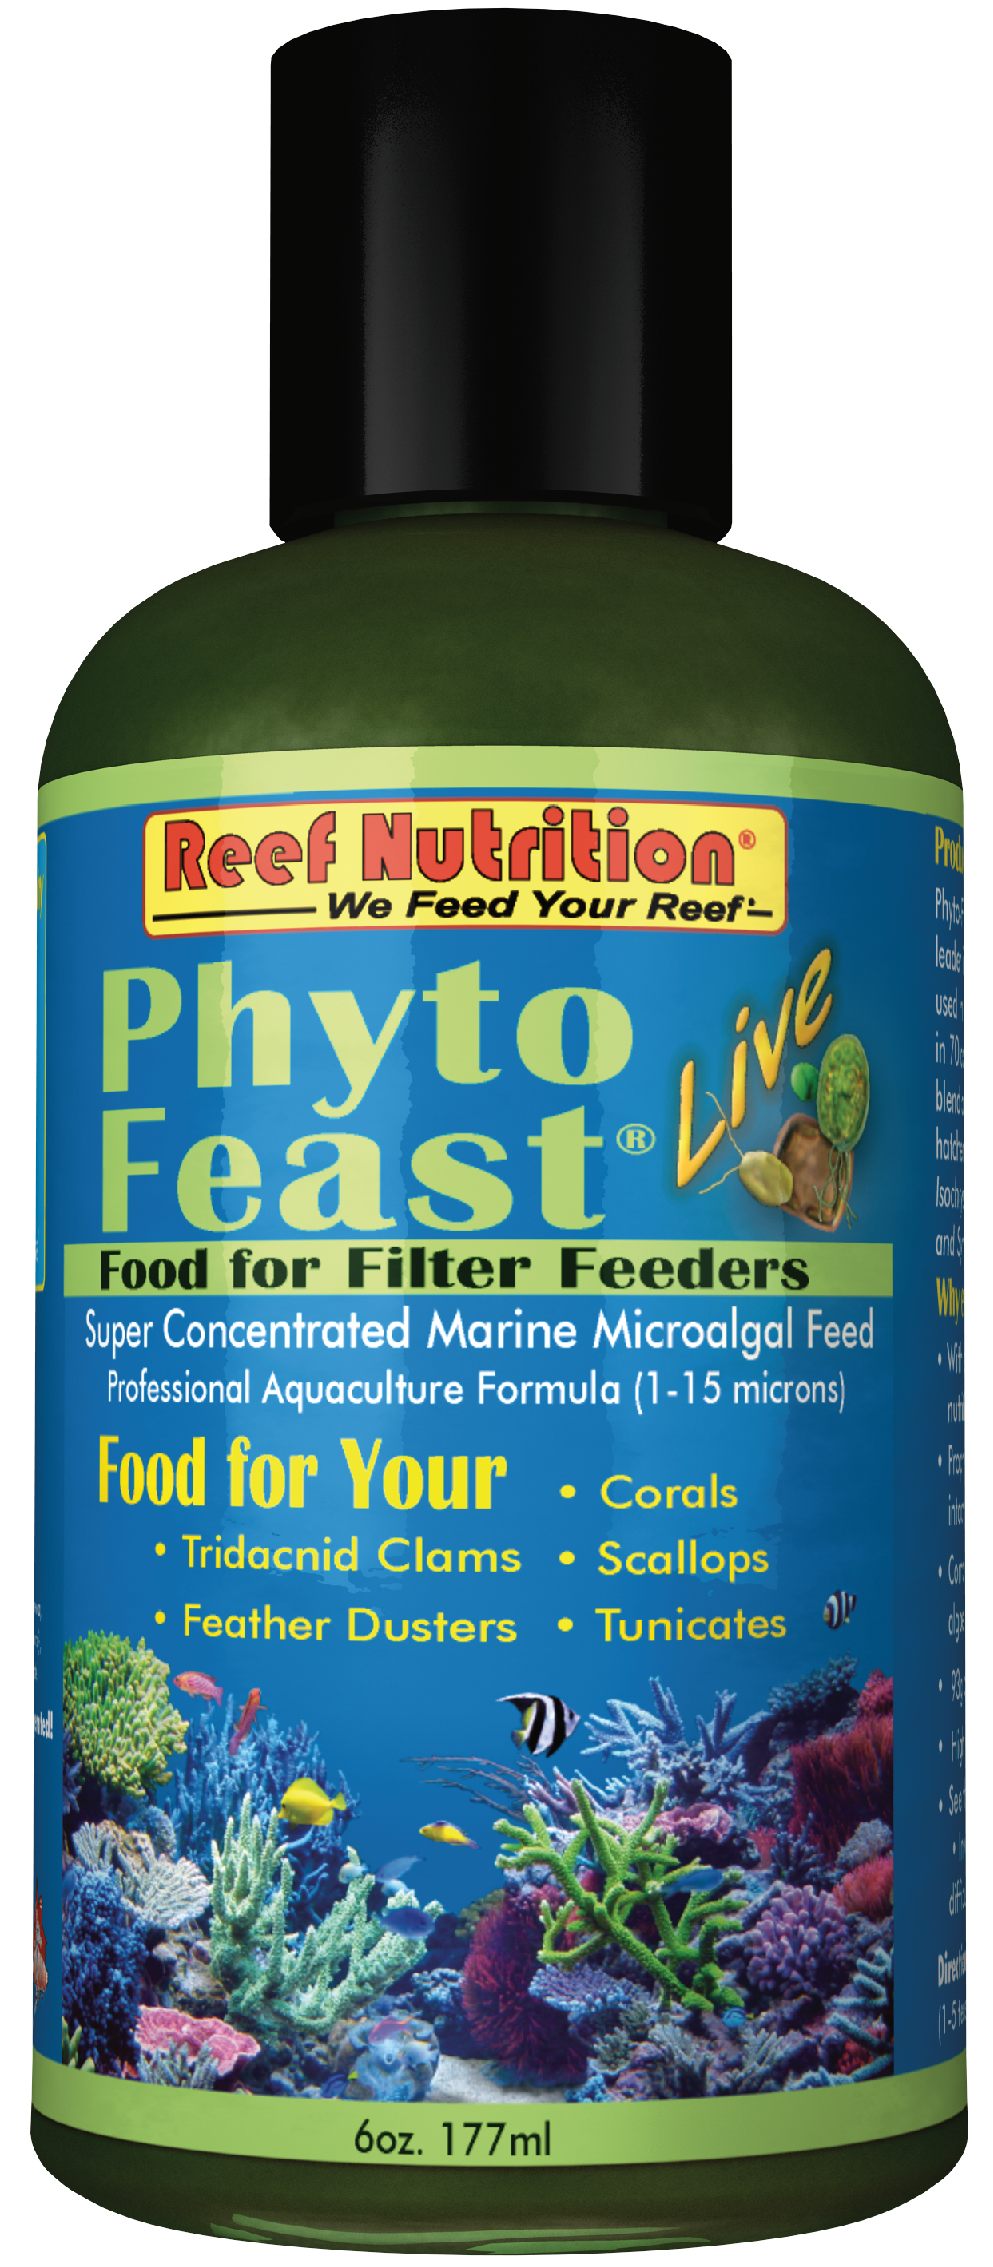 Phyto Feast Live